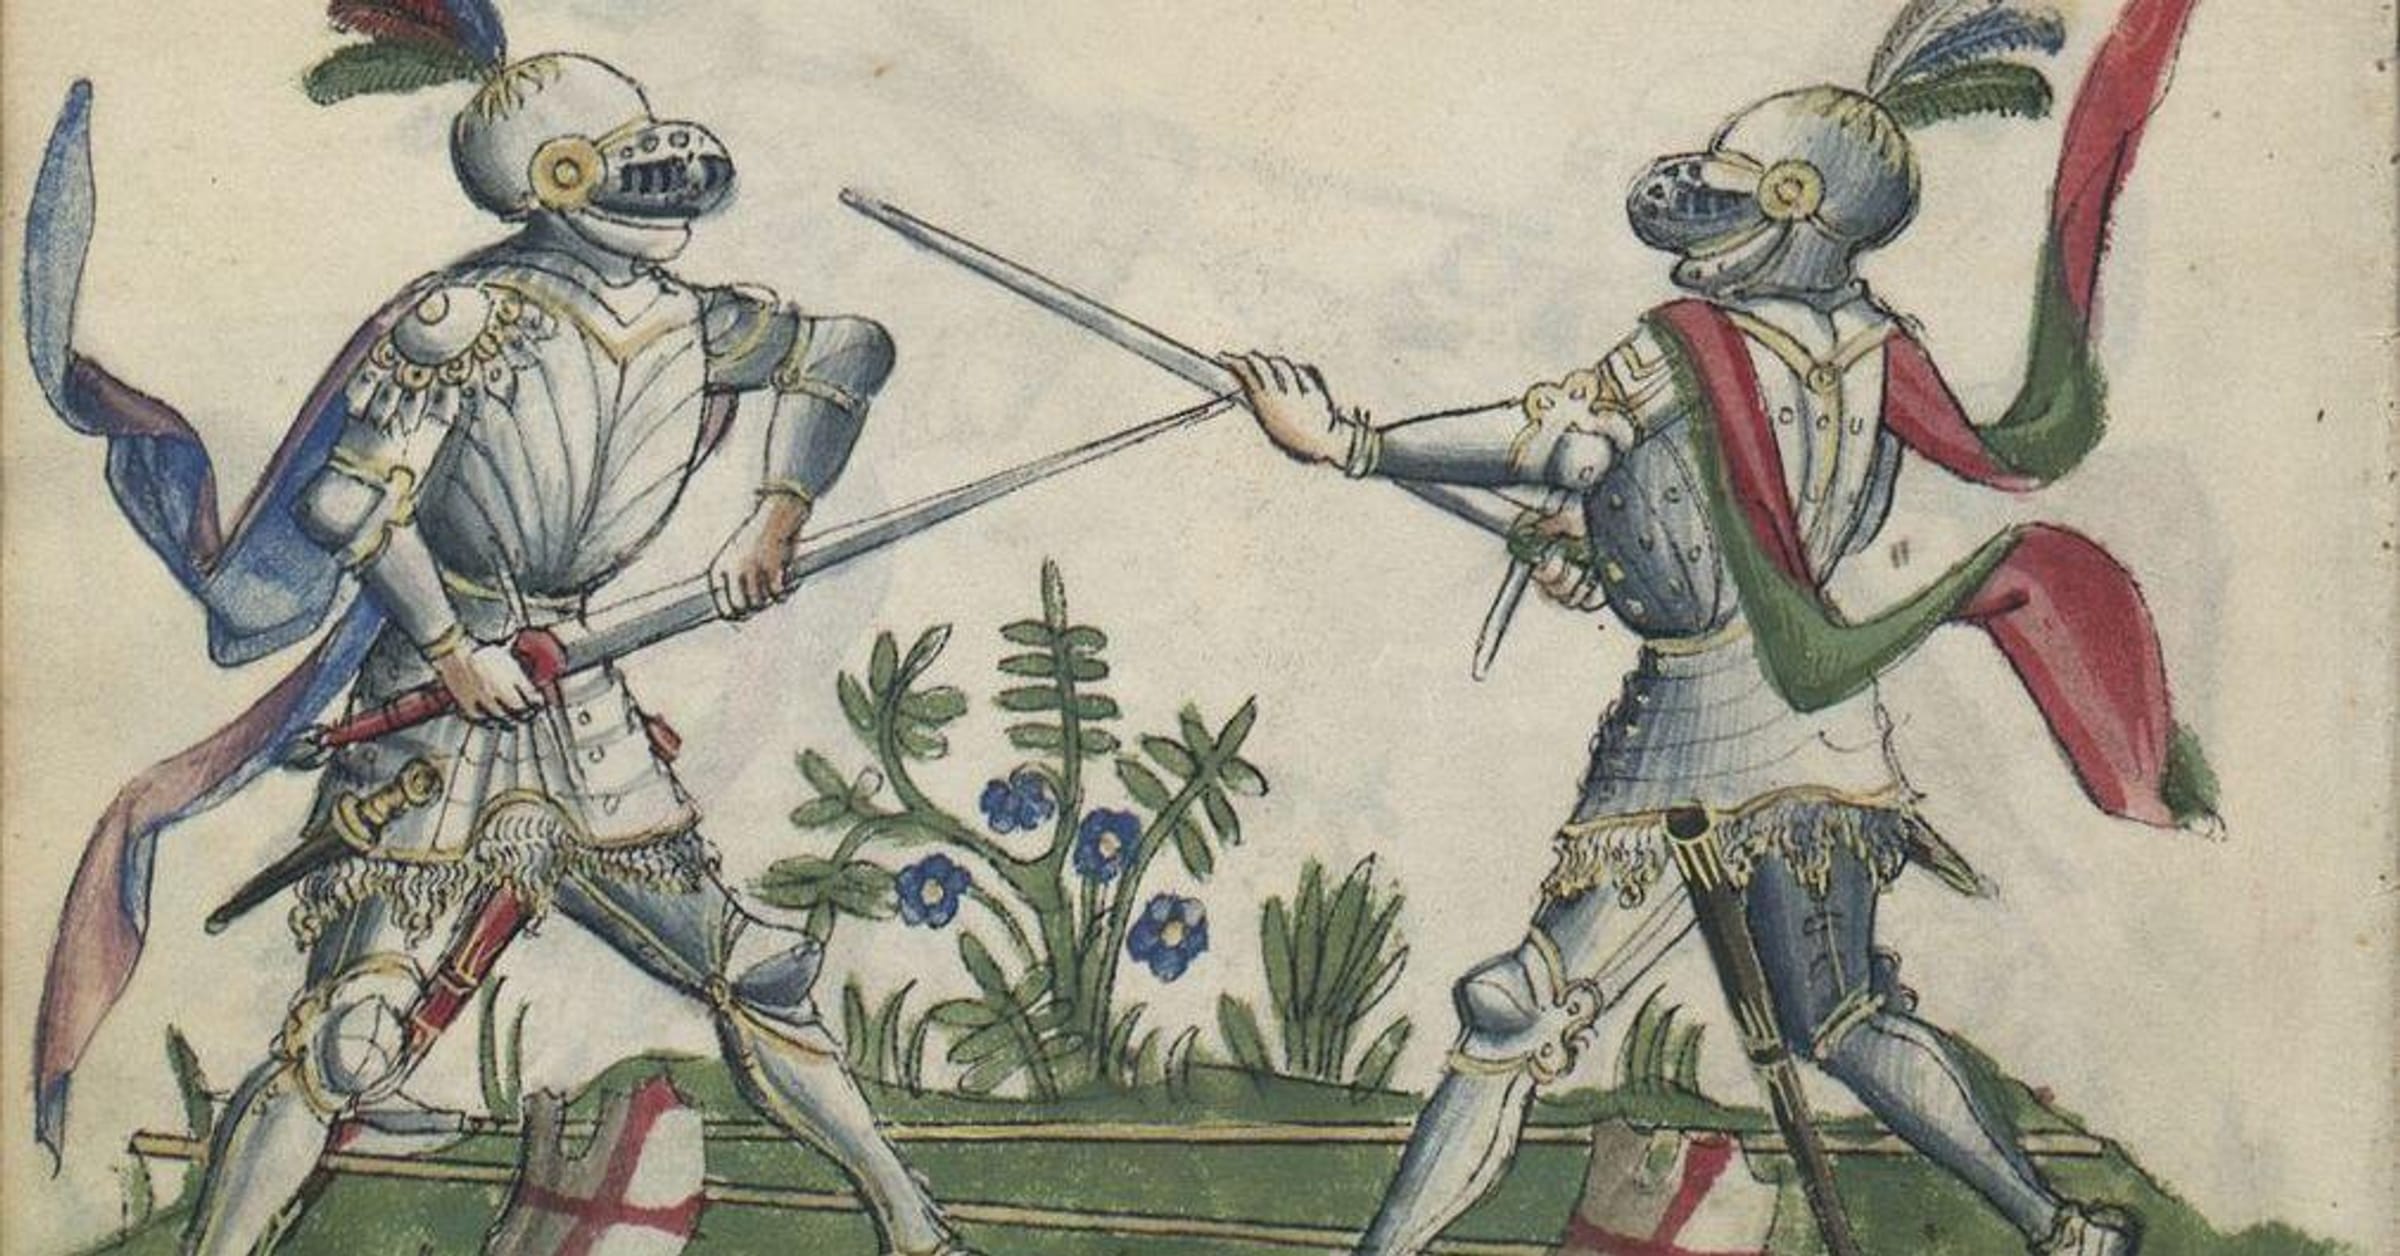 Old School Cool: Morphy's Murderous Knights 